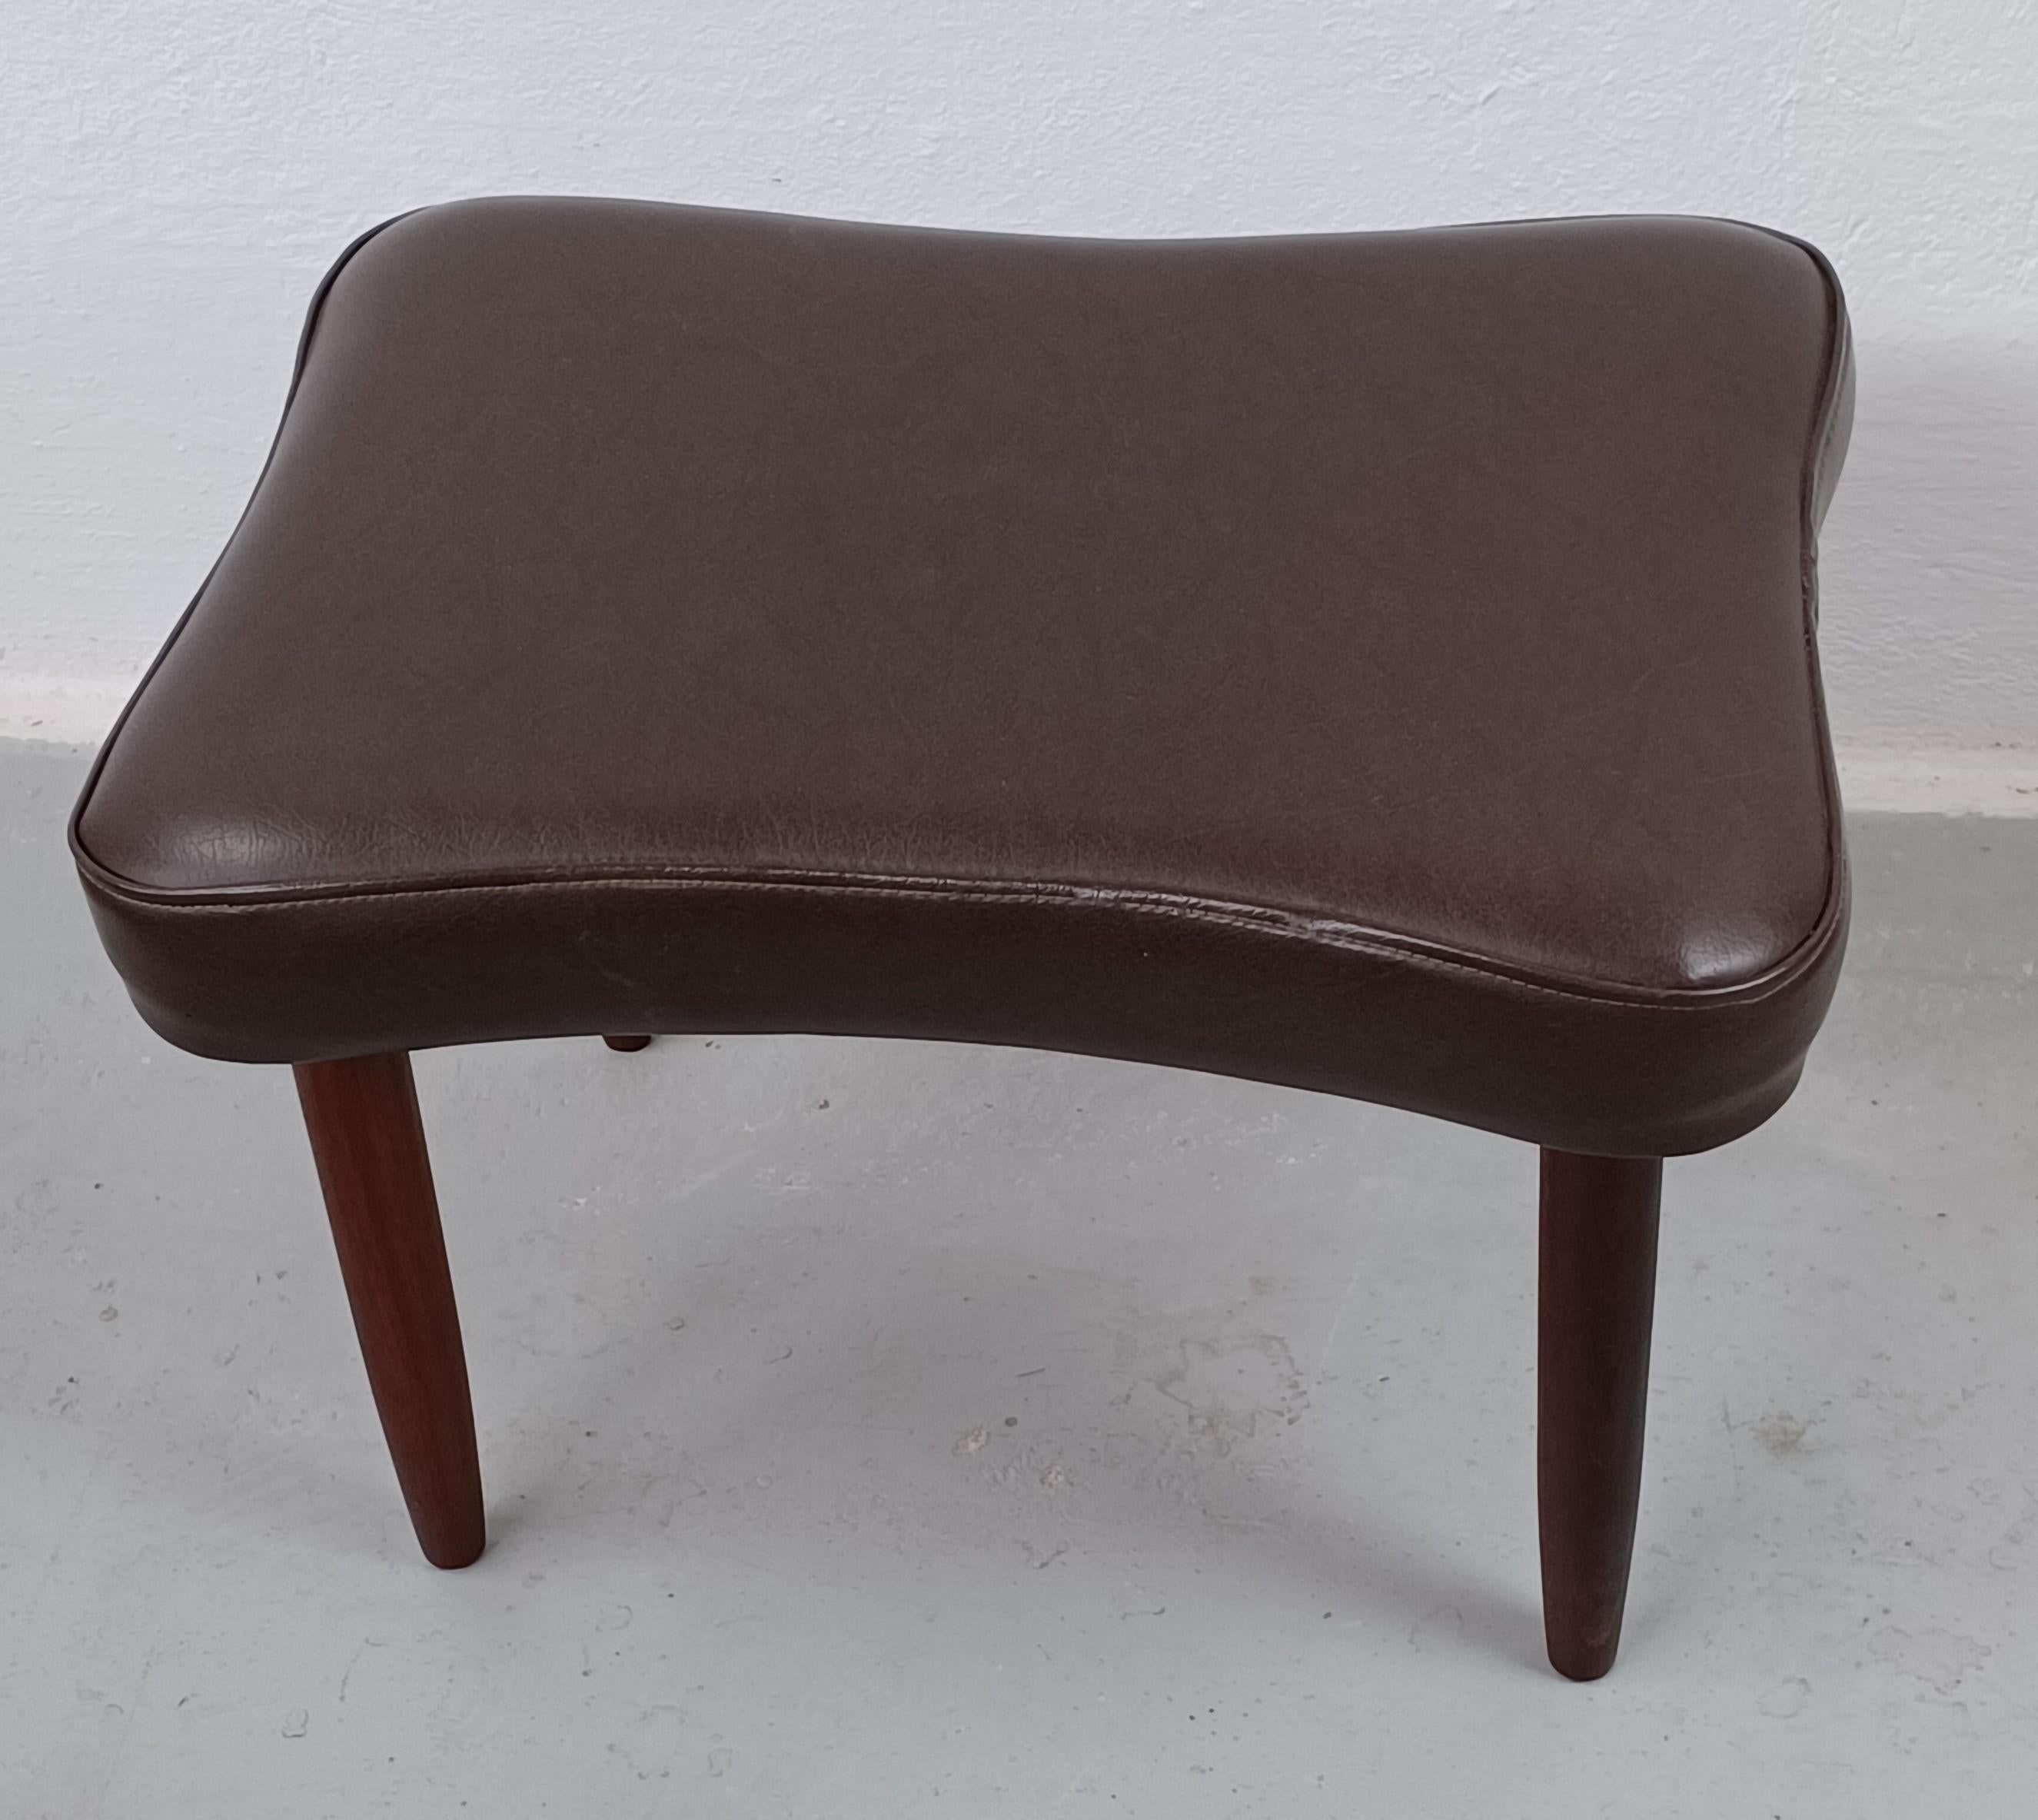 1960s Danish footstool in teak and faux leather manufactored by Capri

Danish midcentury footstool with elegant organic shaped seat upholstered in brown faux leather and legs in solid teak.

The footstool is in good vintage condition and has been